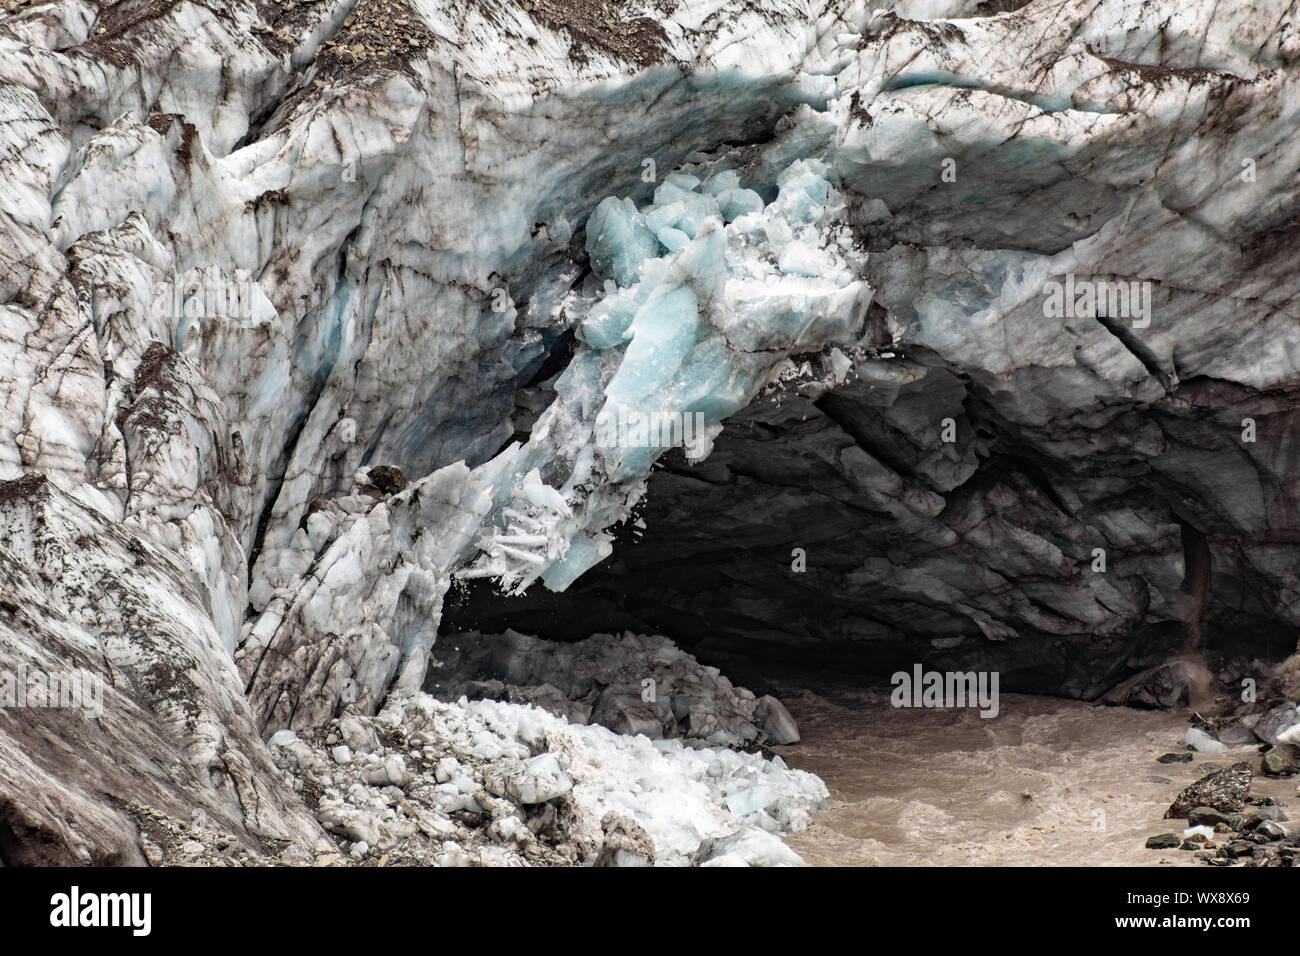 Franz Josef Glacier at the moment of breaking off, New Zealand Stock Photo